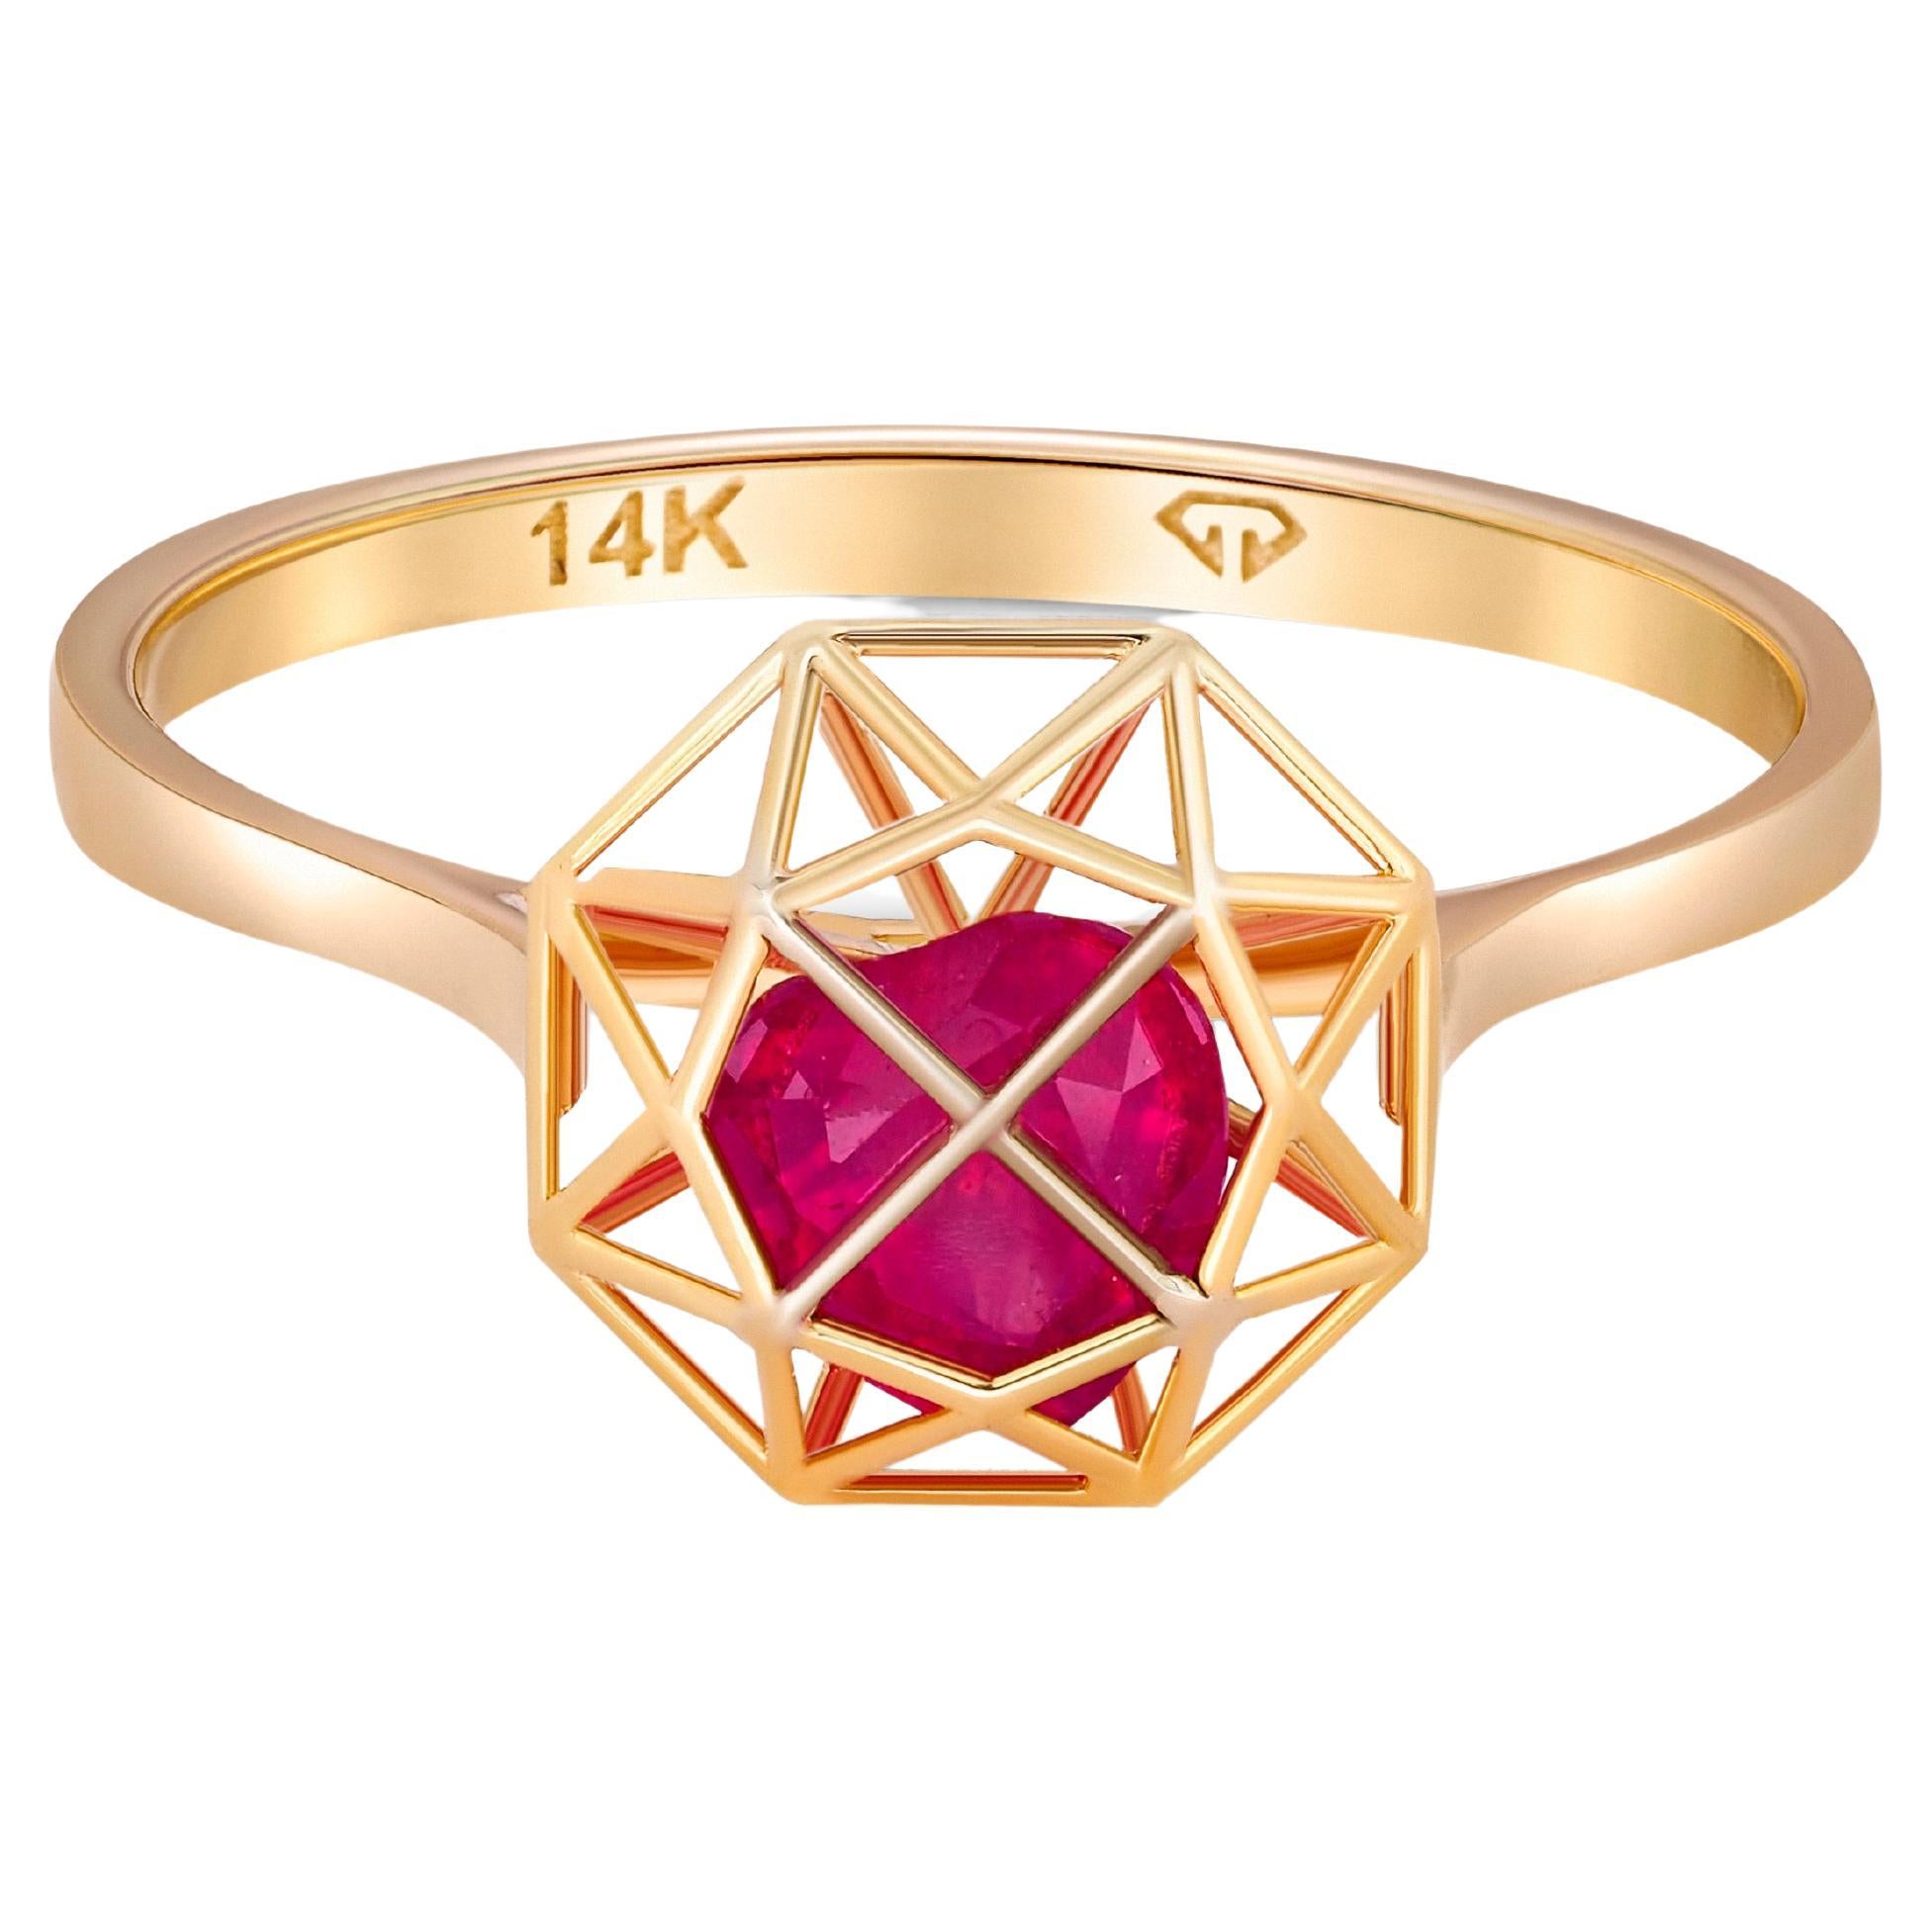 For Sale:  14 karat Gold Ring with Heart Ruby. July birthstone ruby ring. Love ring